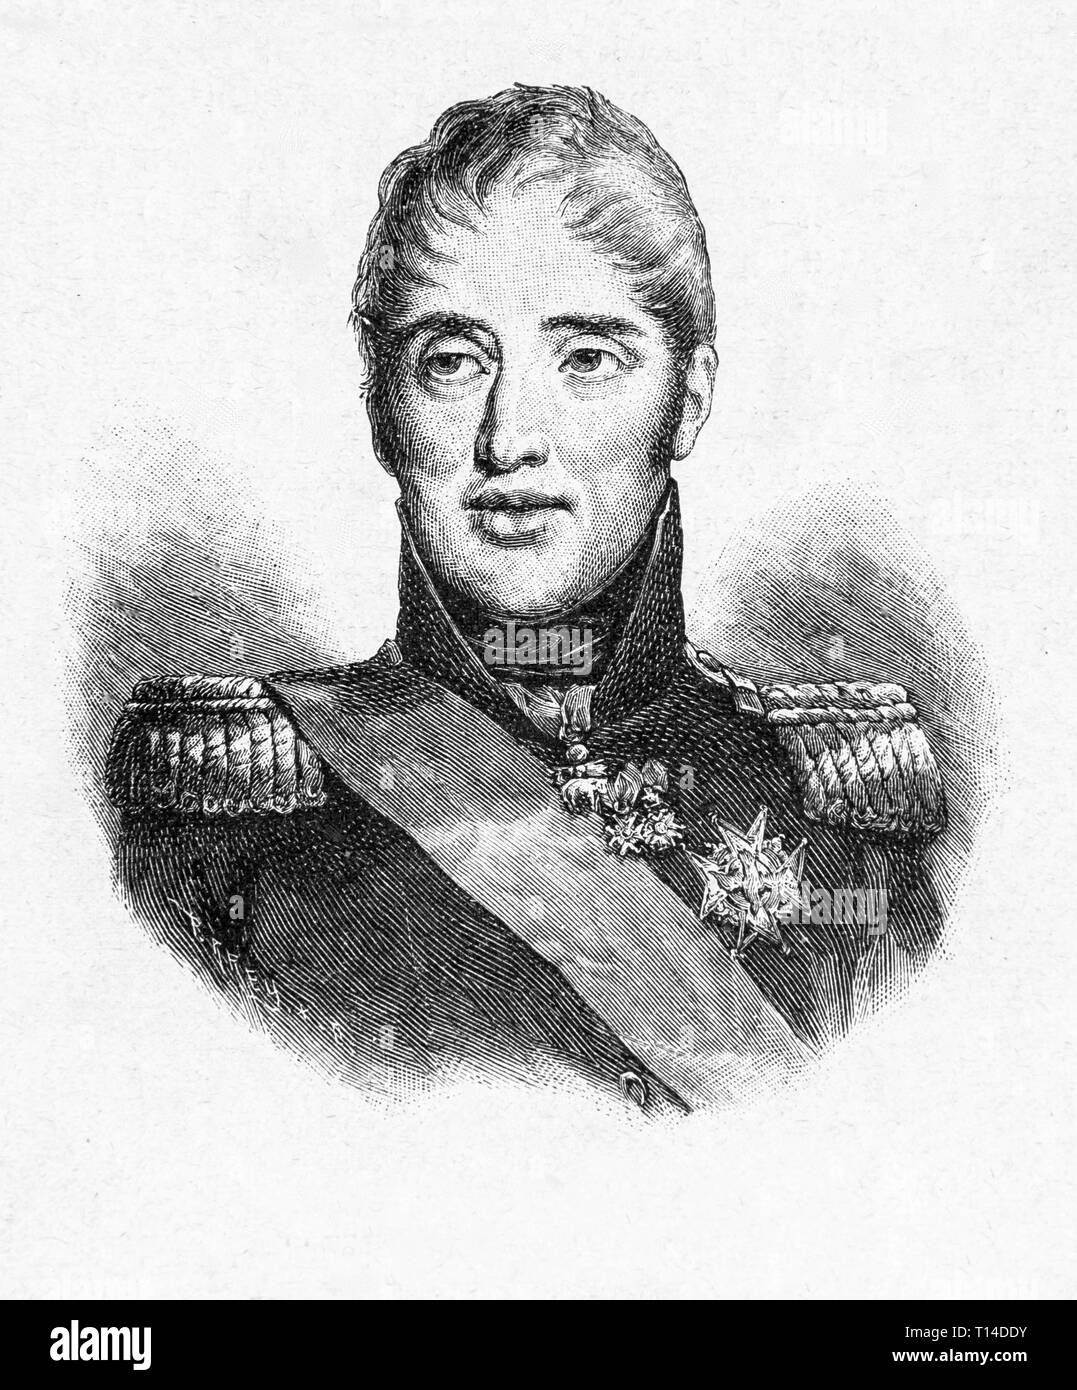 Karl X; King of France.; Portrait of Charles Dushen. Digital improved reproduction from Illustrated overview of the life of mankind in the 19th century, 1901 edition, Marx publishing house, St. Petersburg. Stock Photo